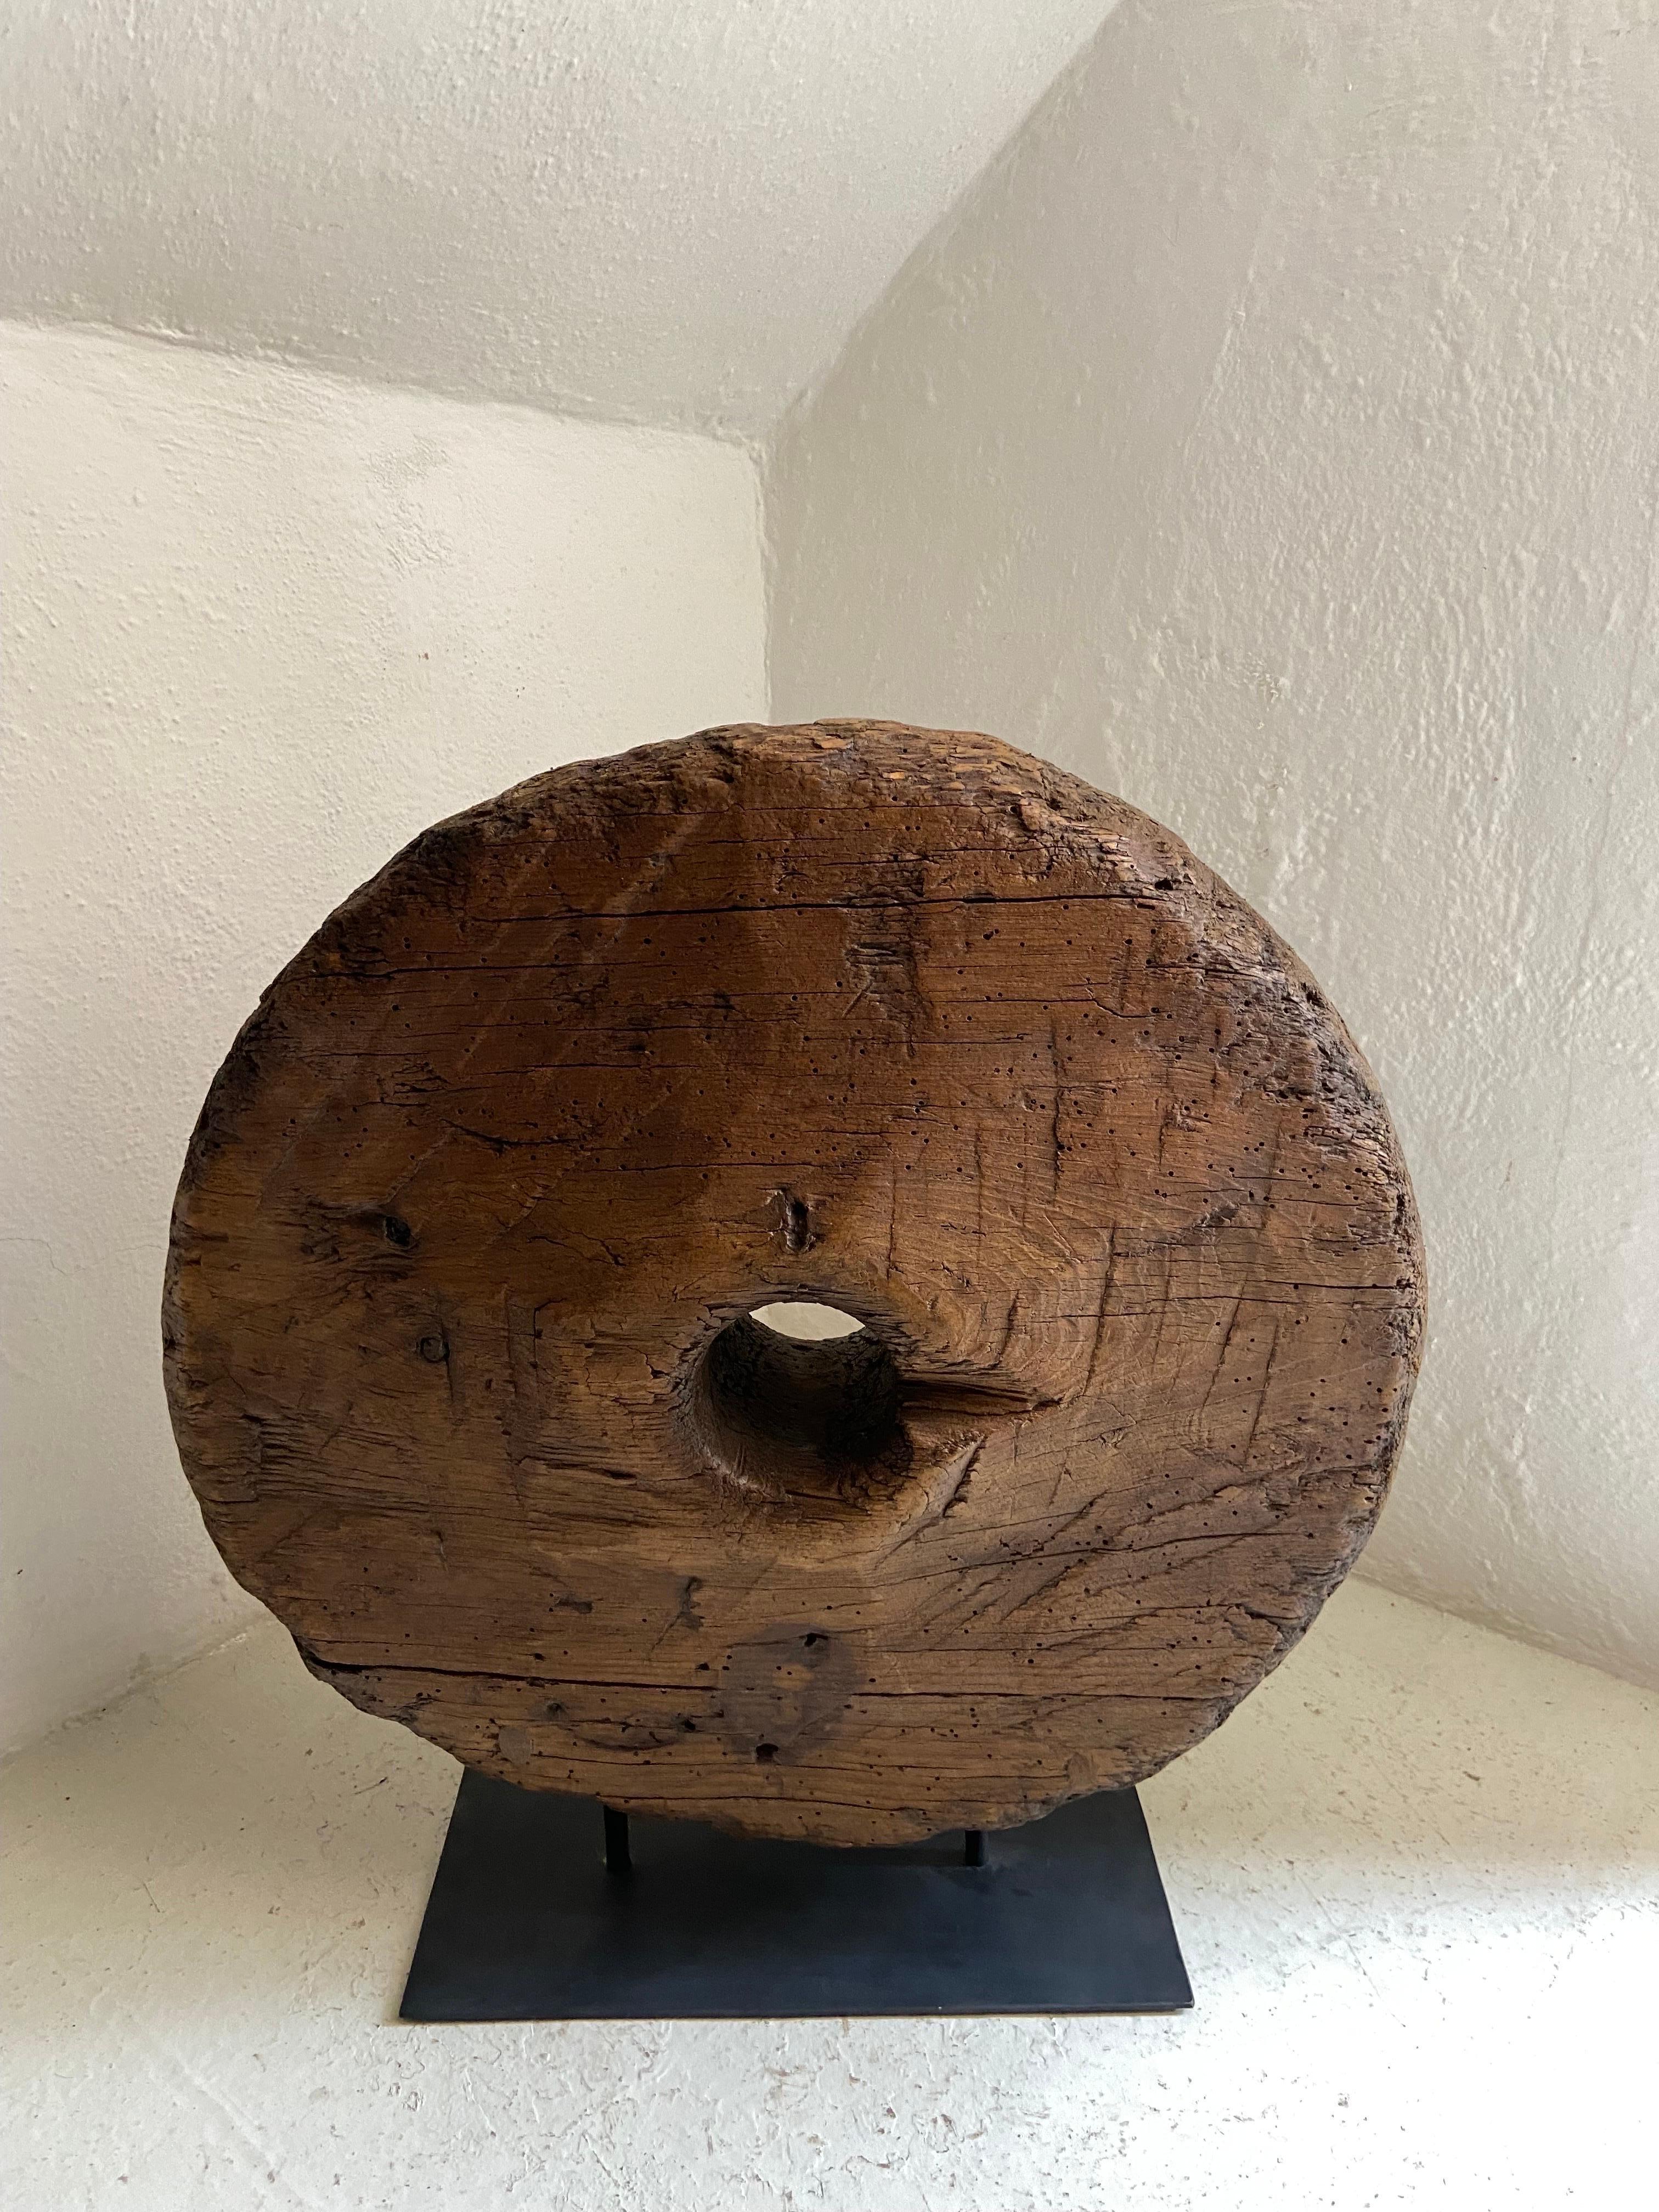 Hardwood wagon wheel from the state of Puebla, Mexico, circa early 19th century. The wagon wheel is from the colonial era. Most colonial wheels contain iron spokes, so it is quite rare to find wheels that are solid wood.